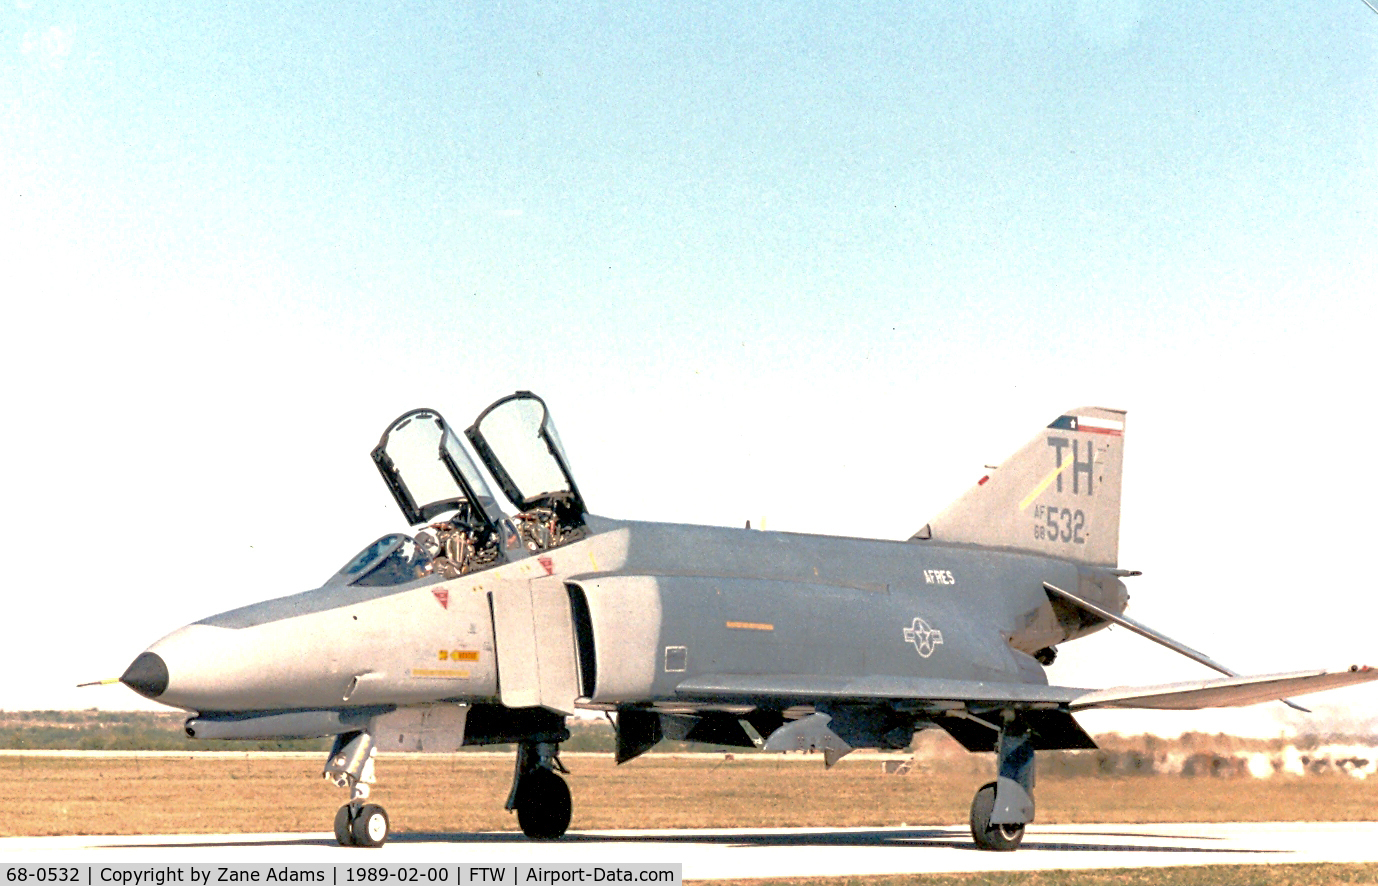 68-0532, 1968 McDonnell Douglas F-4E Phantom II C/N 3731, F-4E at Meacham Field - This aircraft went to Turkey as part of Peace Diamond IV in 1991